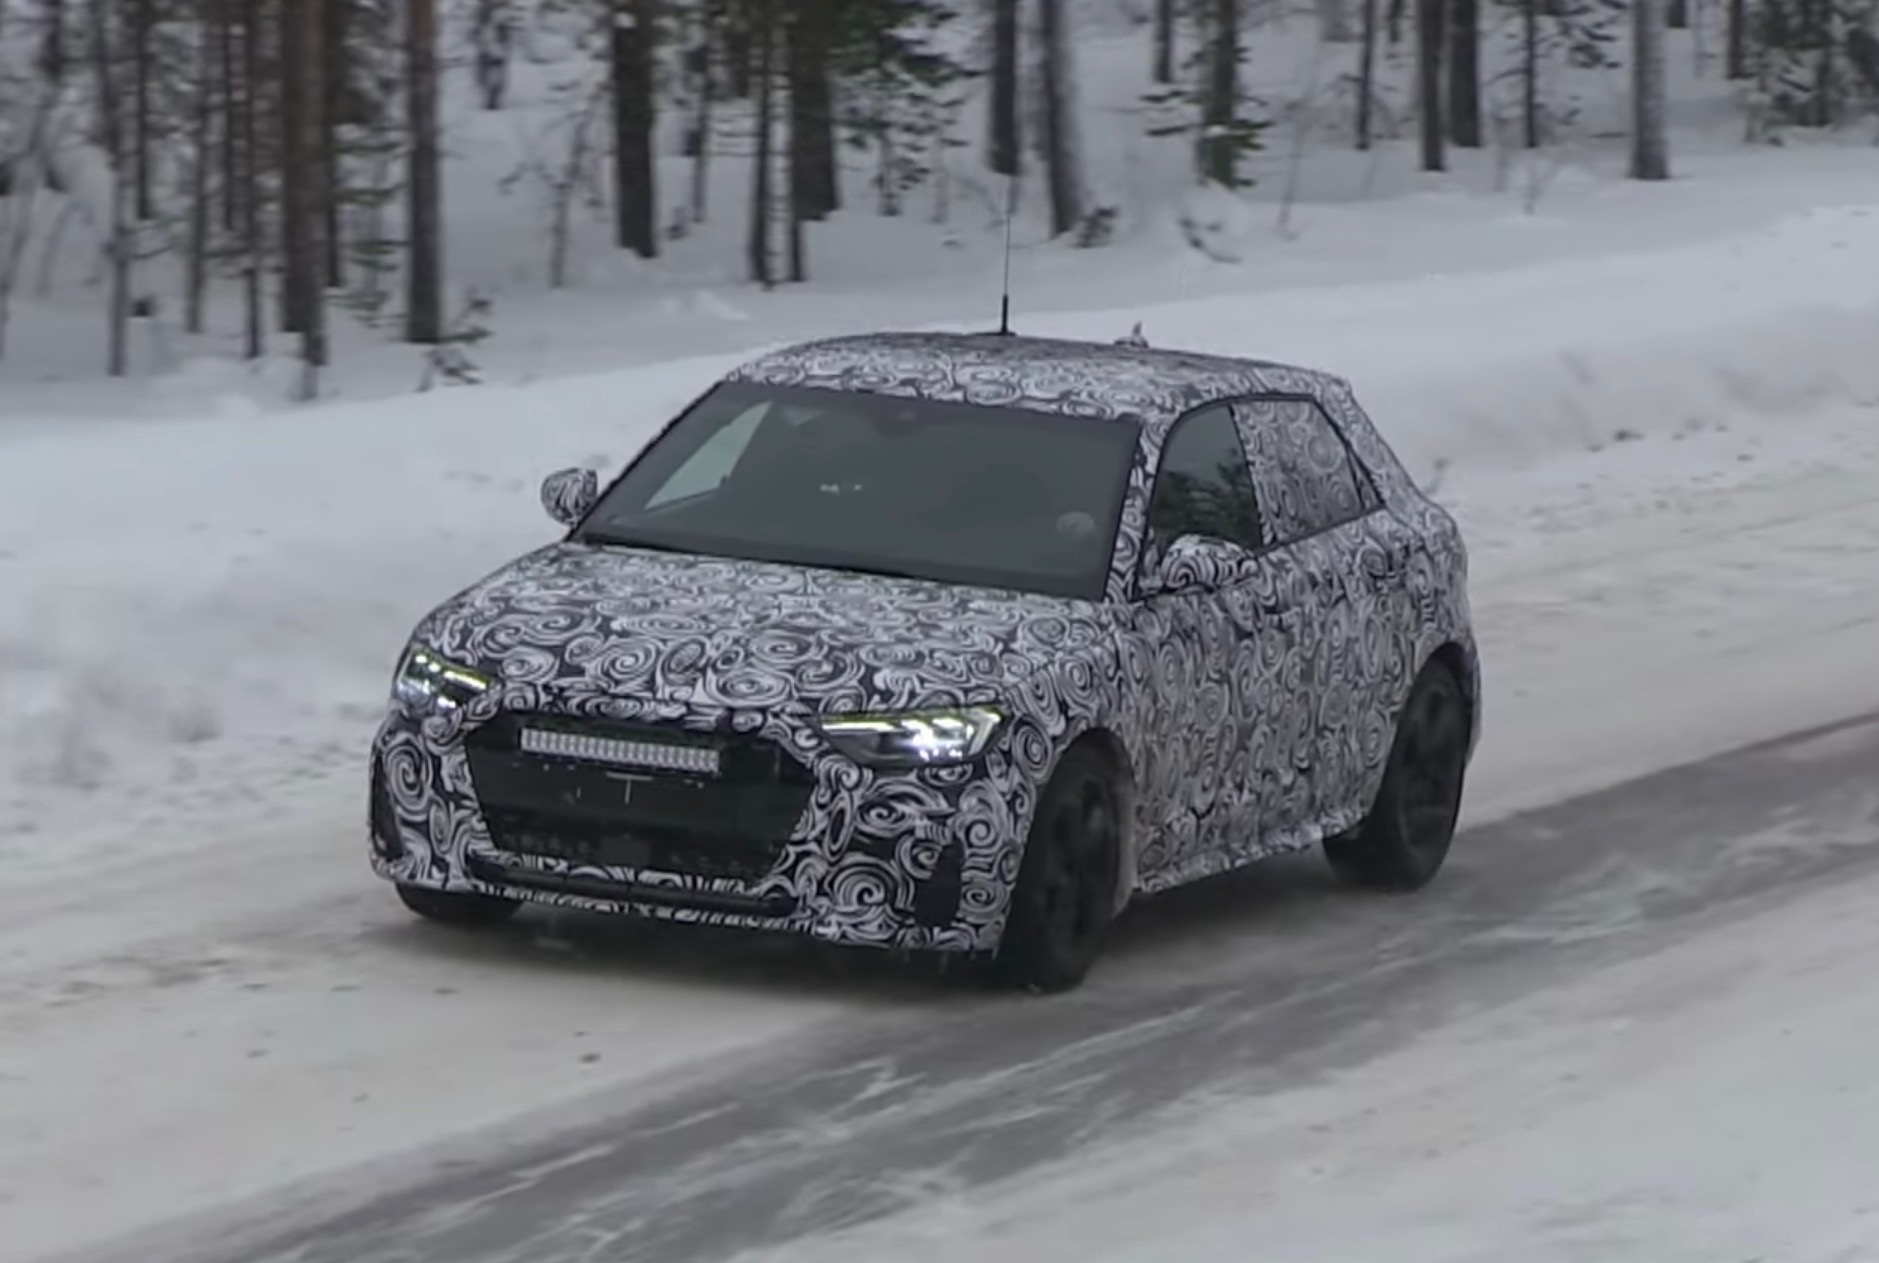 2019 Audi A1 spotted in the wild, adopts MQB platform (video)